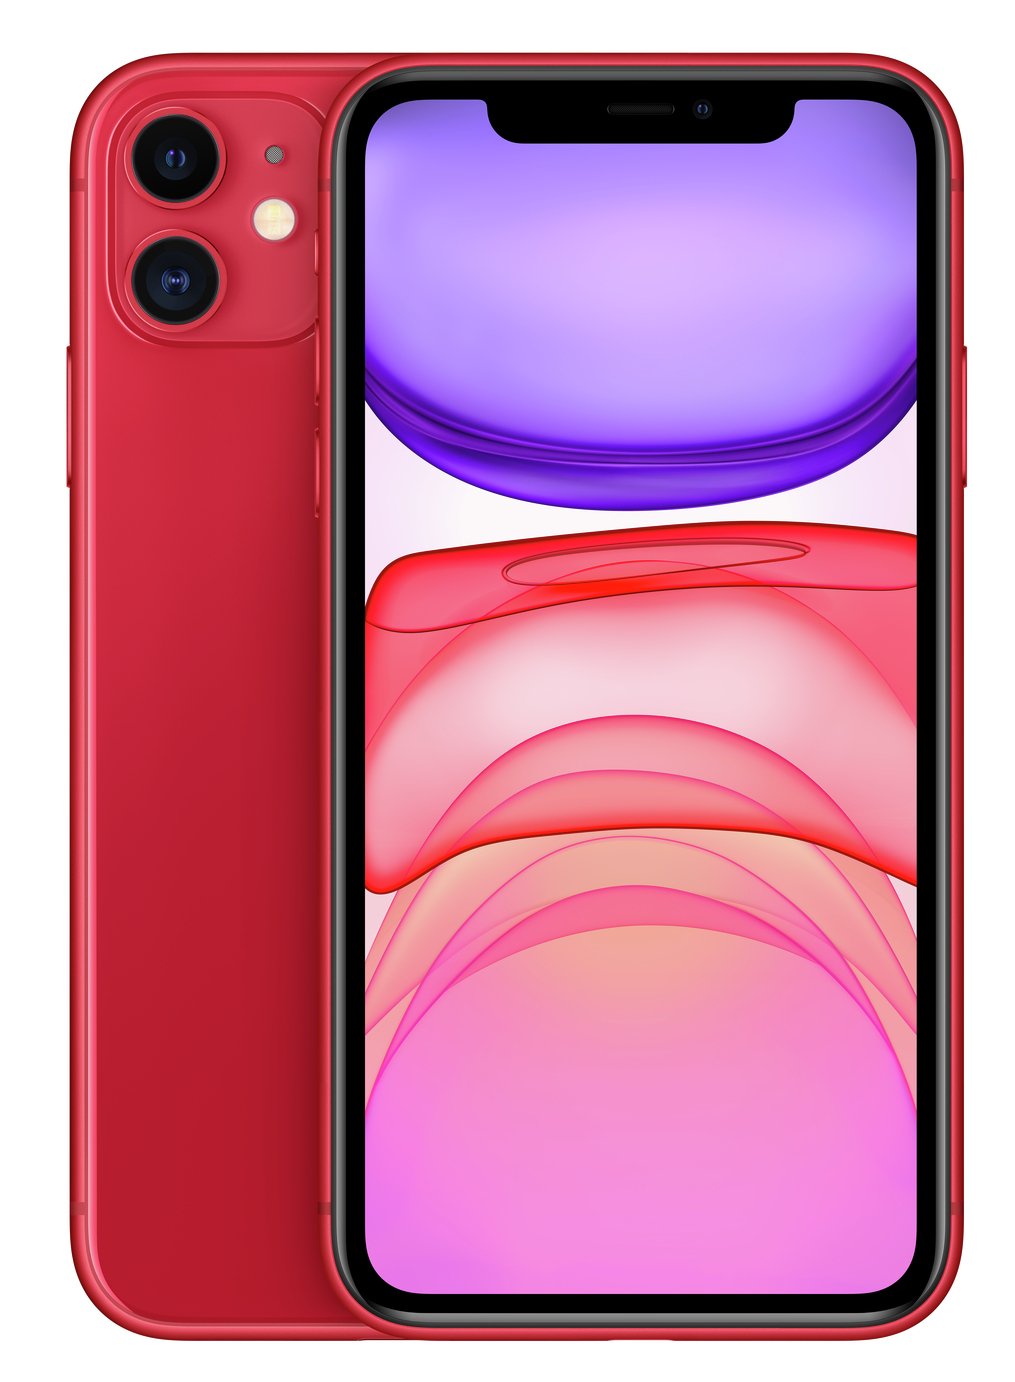 SIM Free iPhone 11 64GB Mobile Phone - Product Red